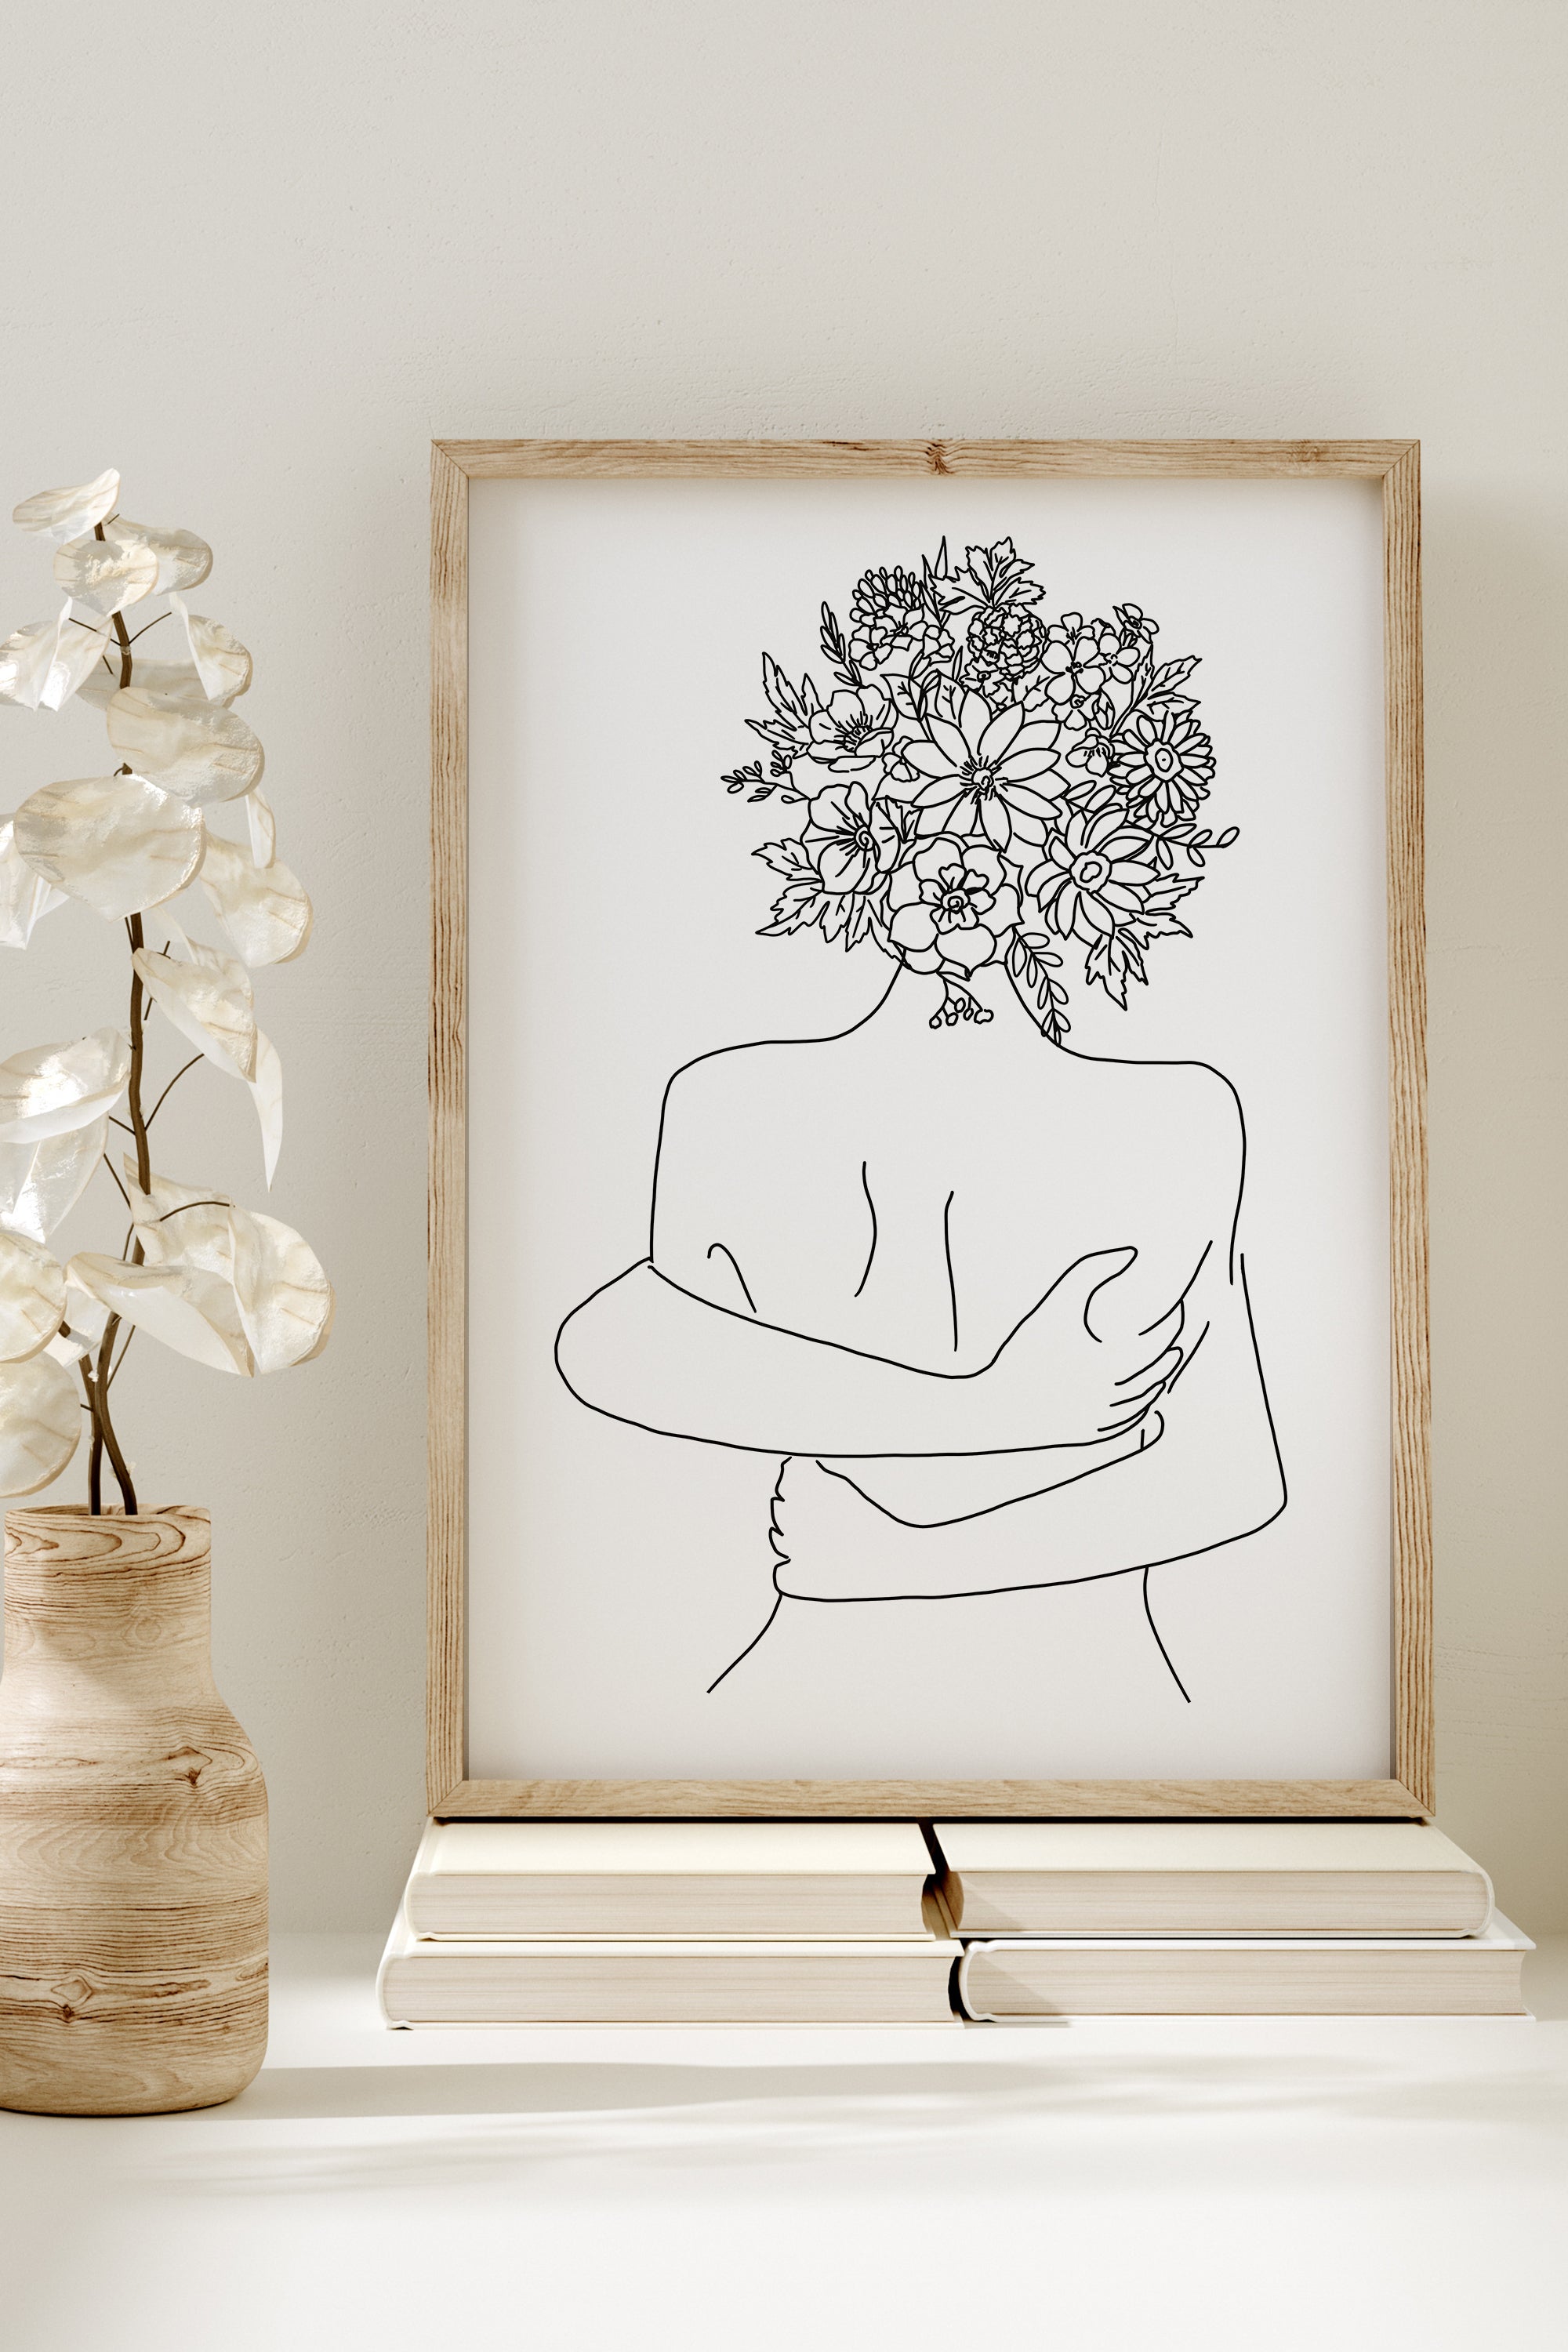 Minimalist and intimate, this print intertwines abstract floral elements with fascinating lines, telling a visual narrative of a unique love story.